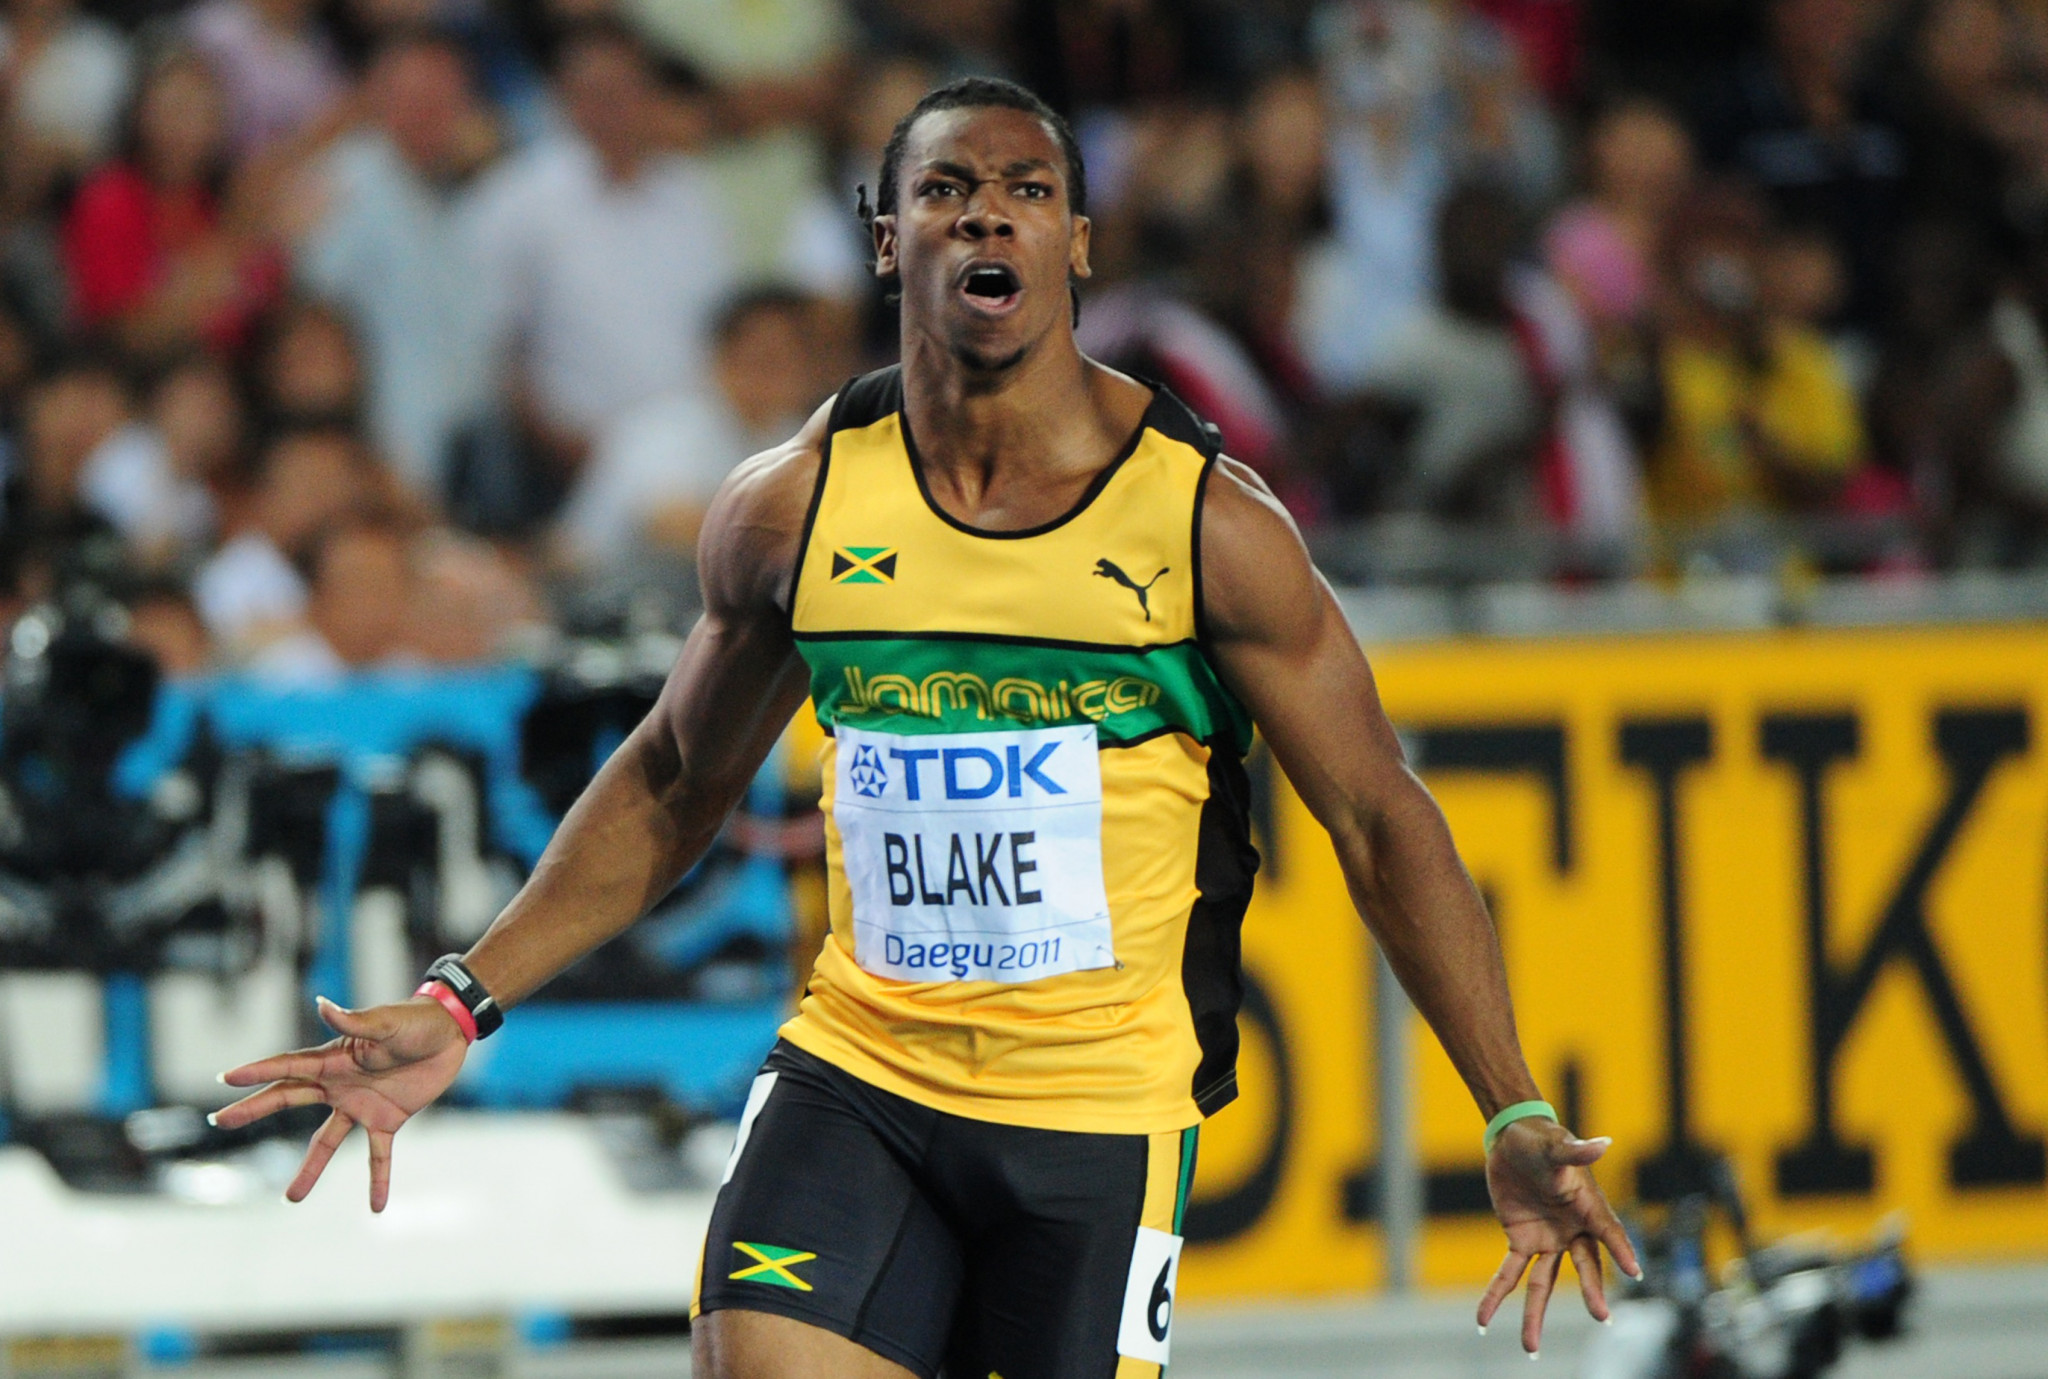 Jamaica's Yohan Blake is hoping to get back to the heights of 2011 when he won the 100m at the IAAF World Championships in Daegu before injury took its toll ©Getty Images